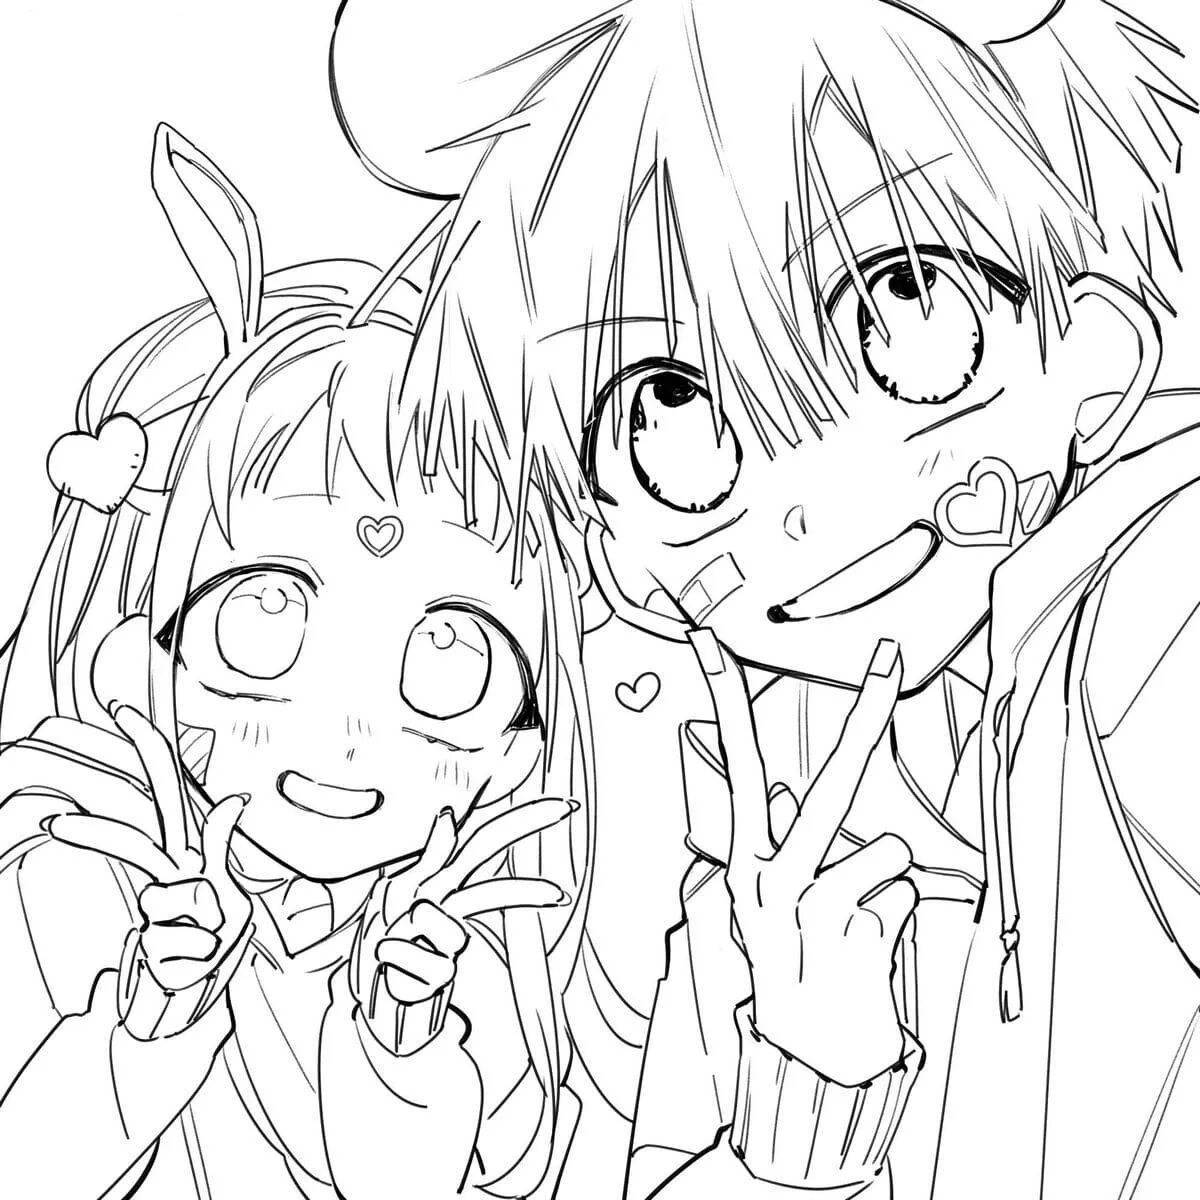 Happy bw anime coloring page